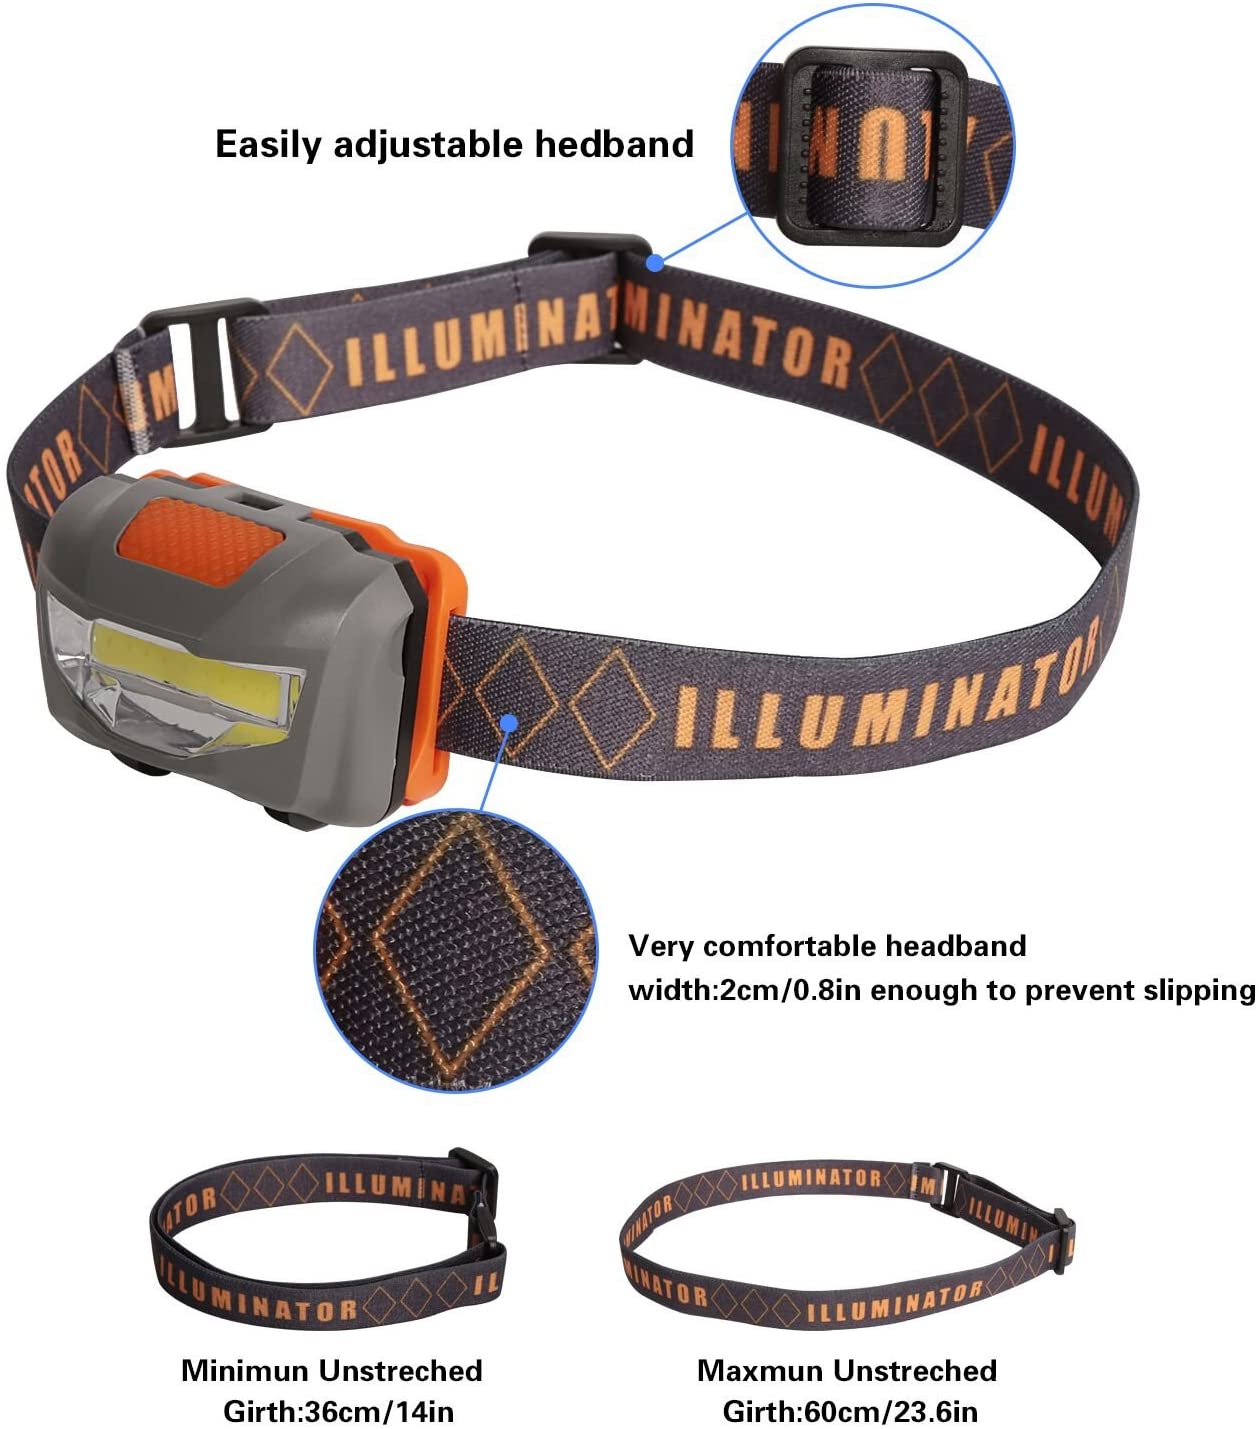 Headlamp Flashlight with Carrying Case, Bright COB-LED Head Lamp, Running  Headlamp, Waterproof Headlight for Adults,Kids,Camping,Night  Jogging,Hiking,Fishing,Reading(NO AAA Battery)